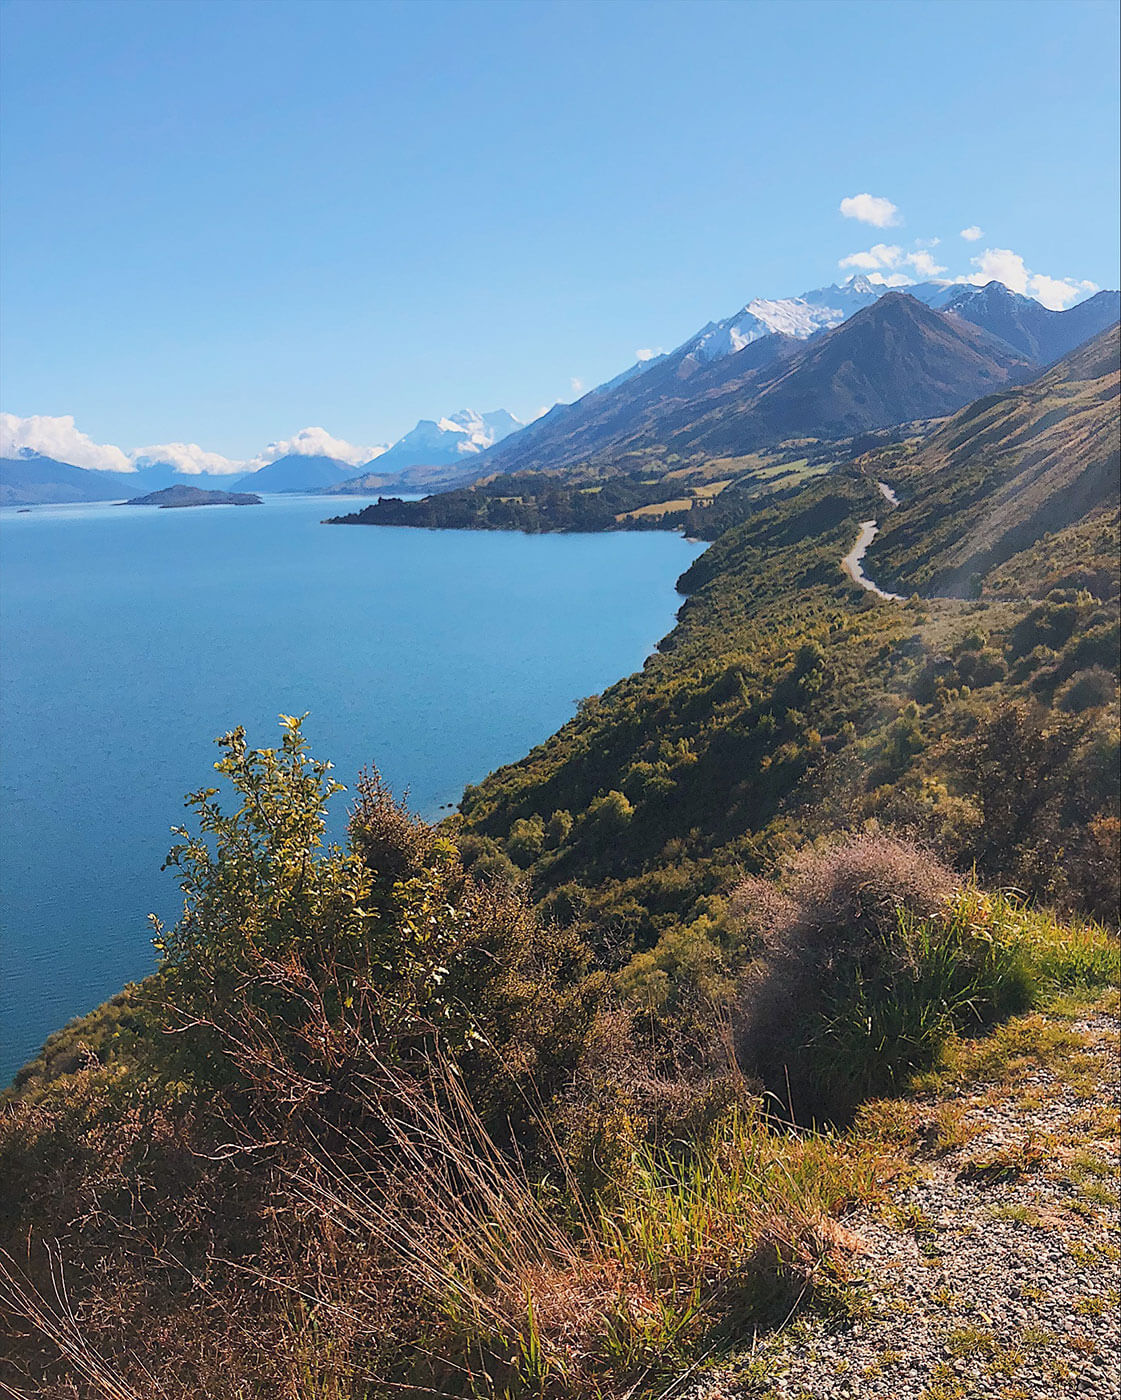 Glenorchy - 10-Day New Zealand South Island Road Trip Itinerary